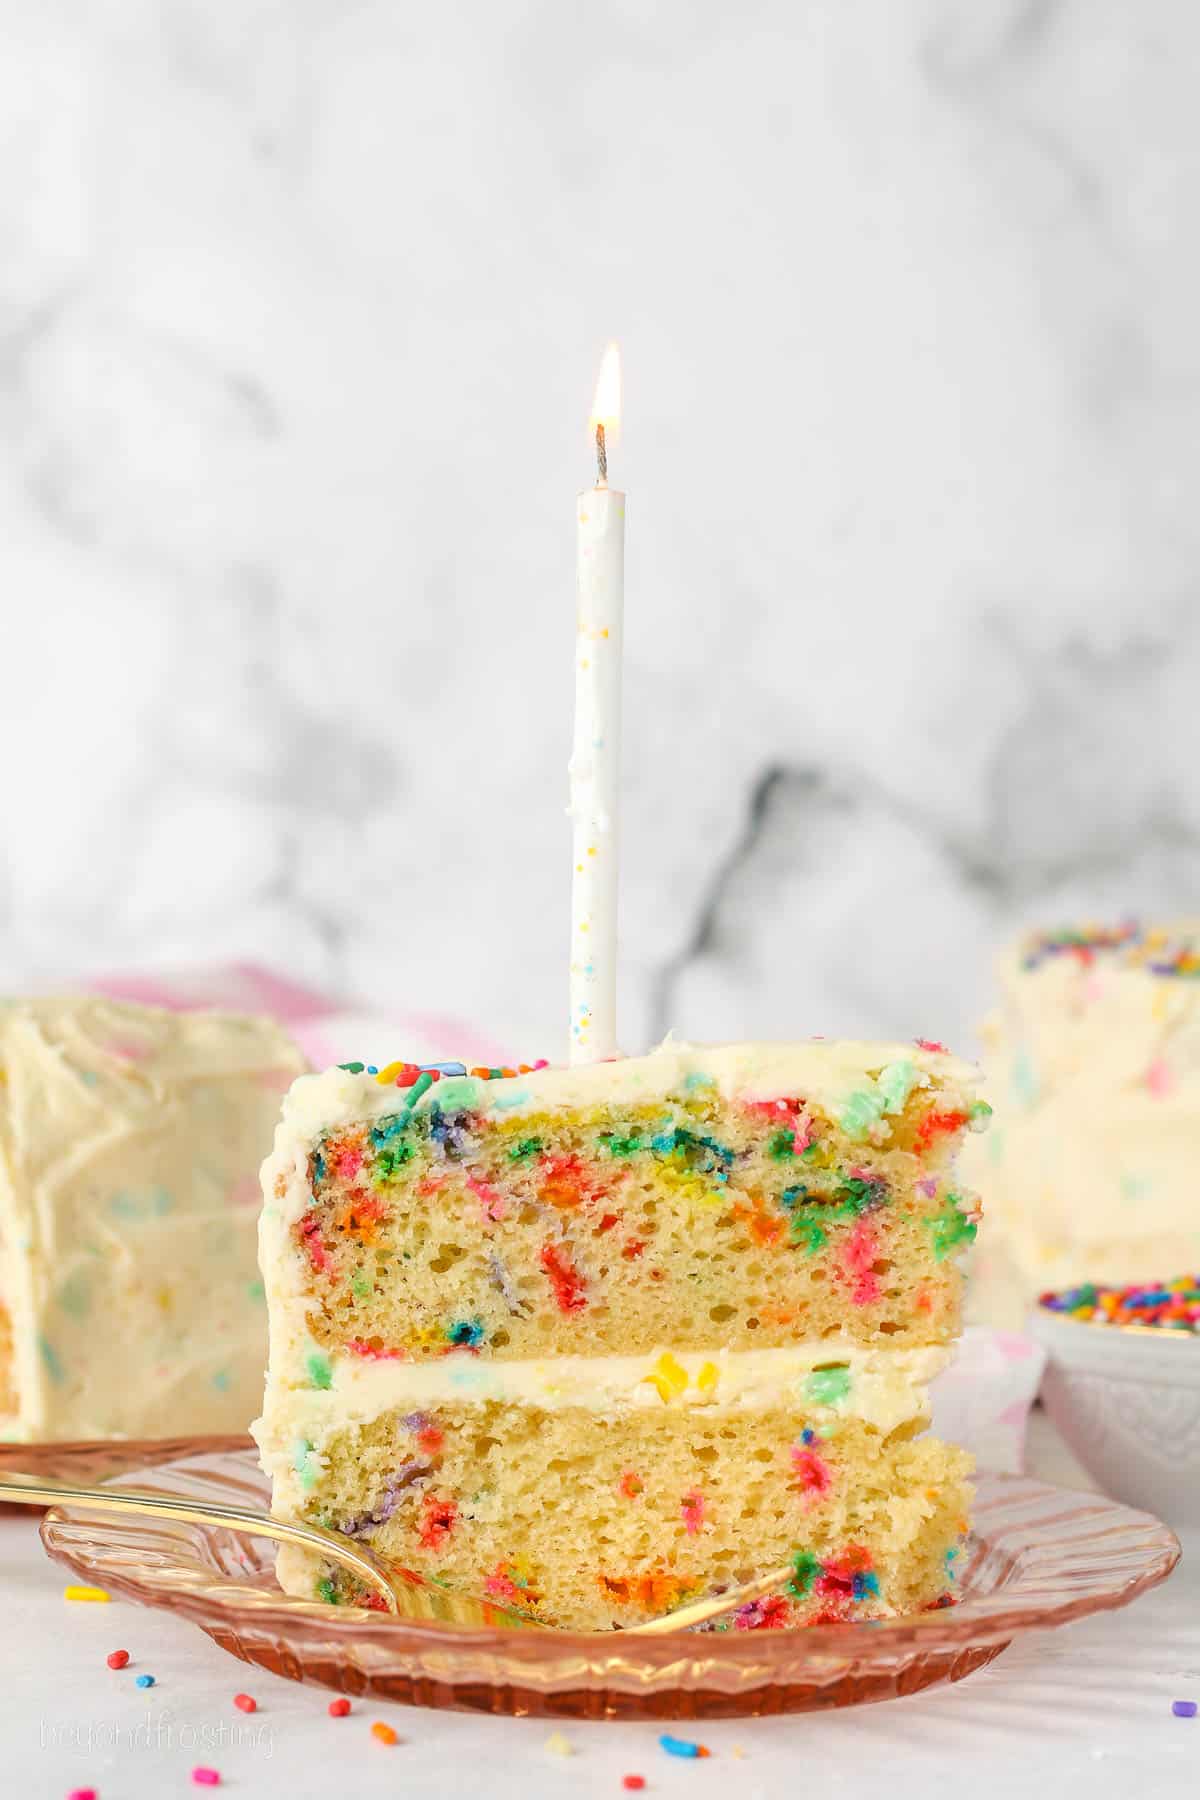 A slice of frosted confetti cake topped with a birthday candle.